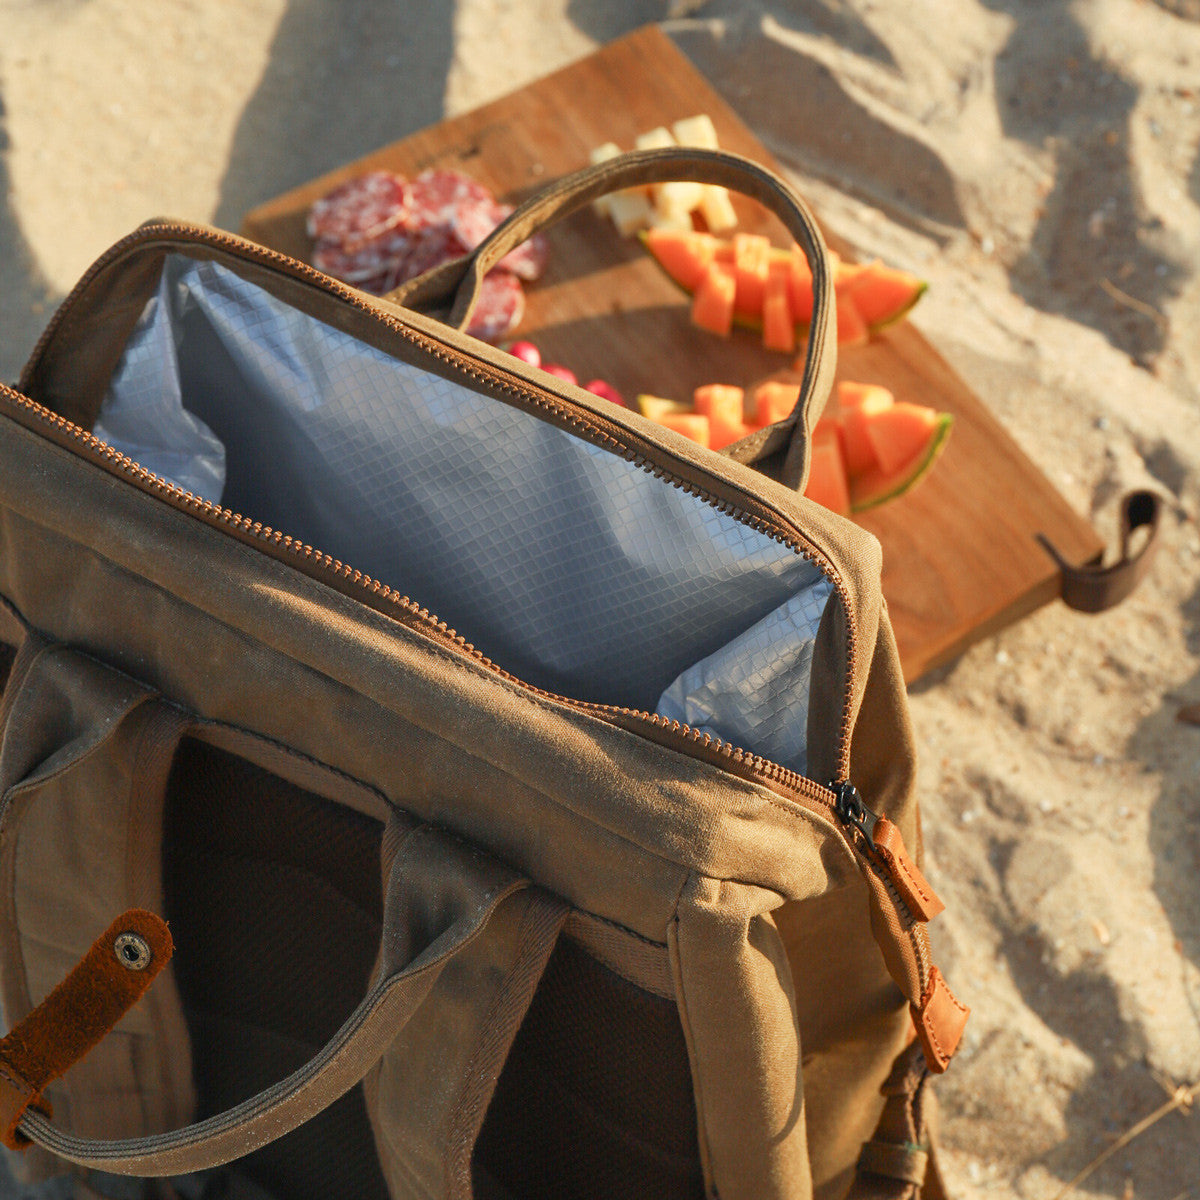 Waxed Canvas Picnic Backpack Cooler